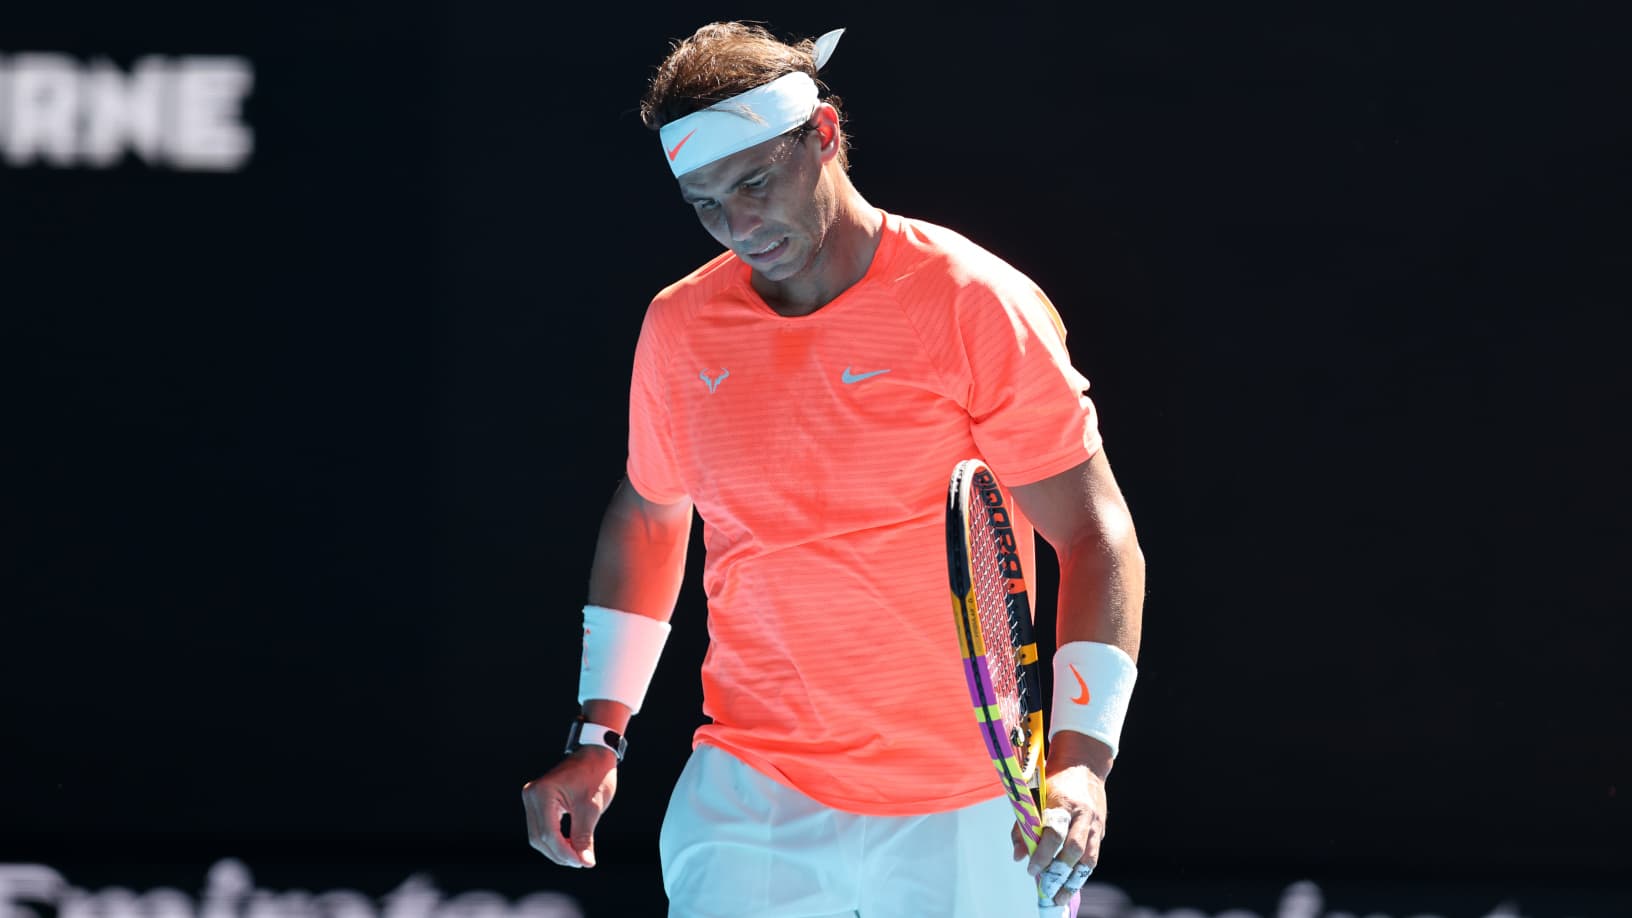 Rafael Nadal announces withdrawal from the French Open